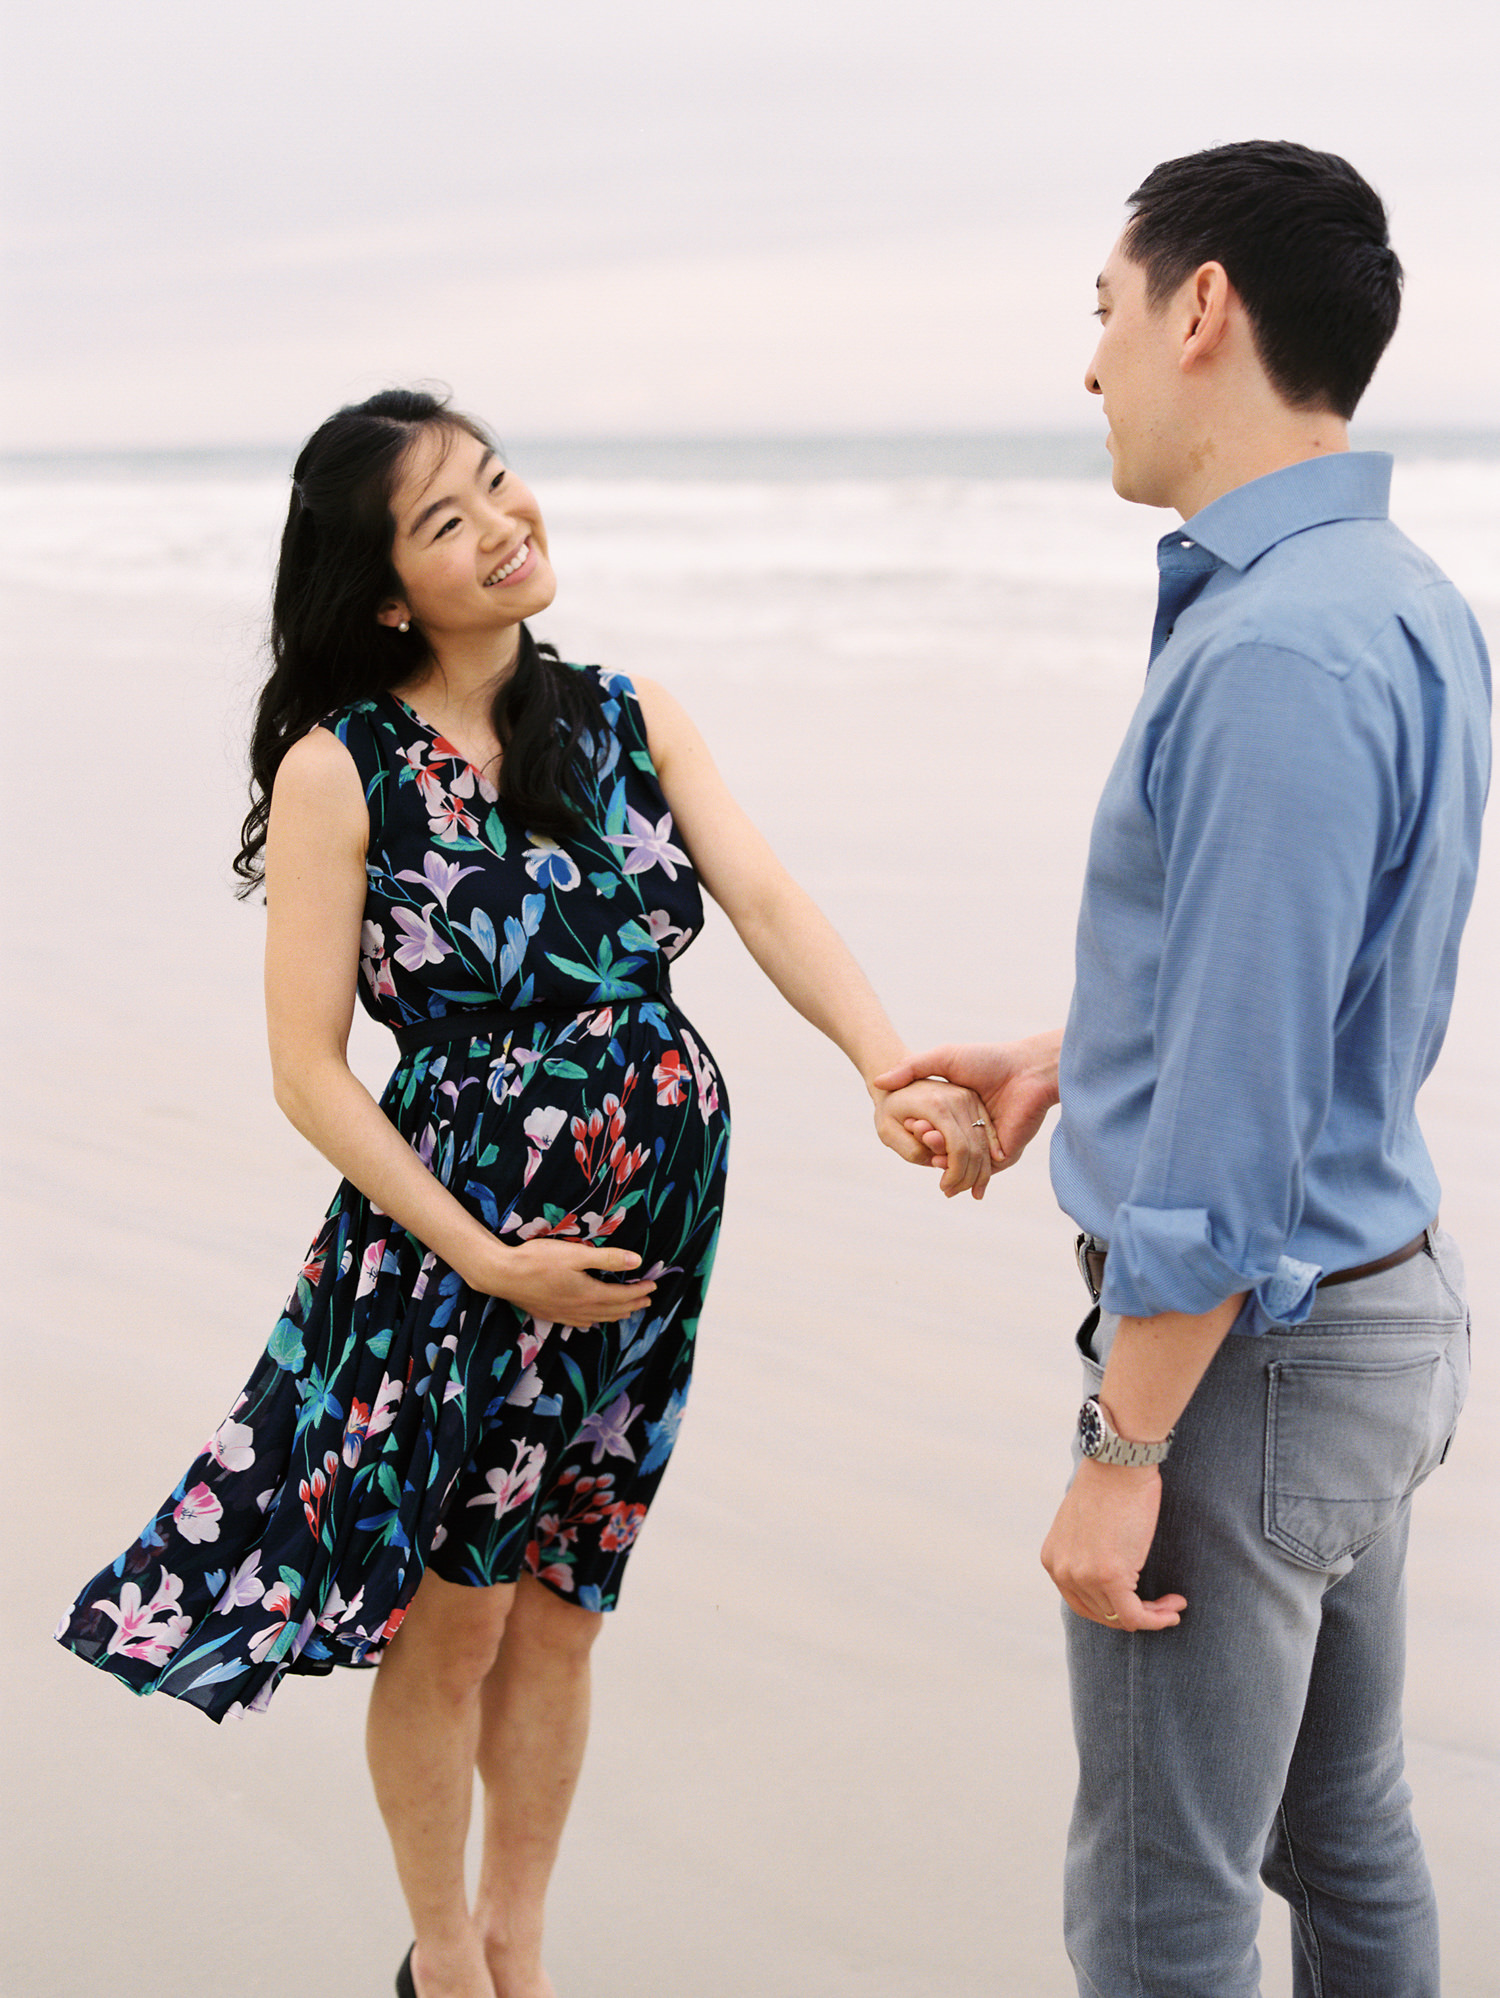 pregnant woman with long black hair and floral dress holding her husbands hand and smiling at him